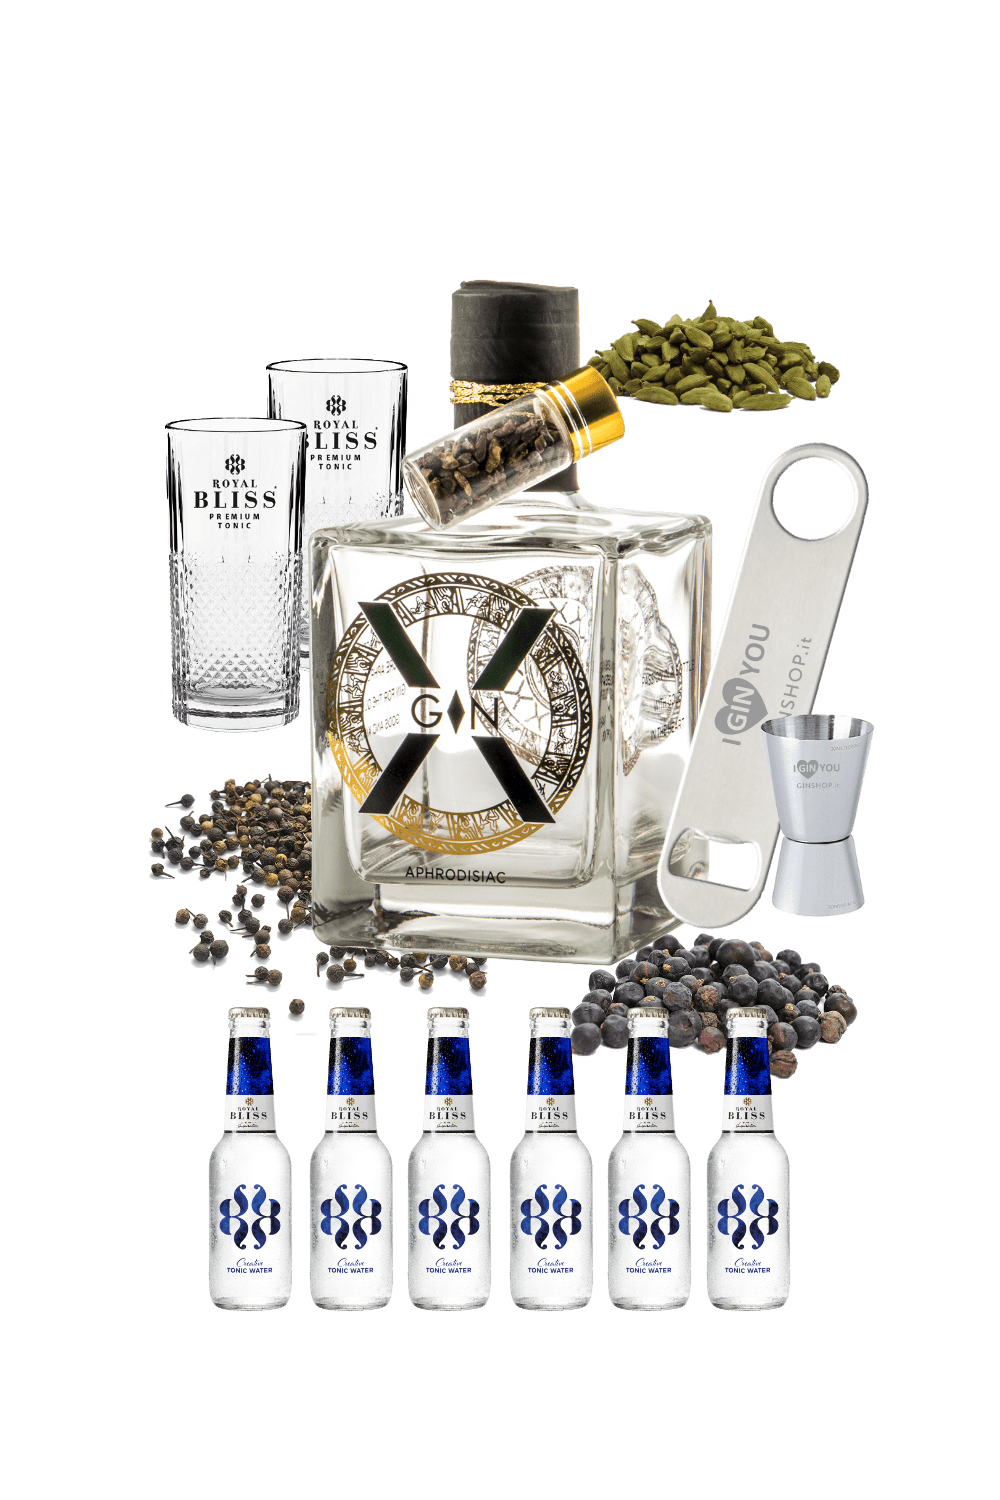 Mission Ginpossible – X-gin